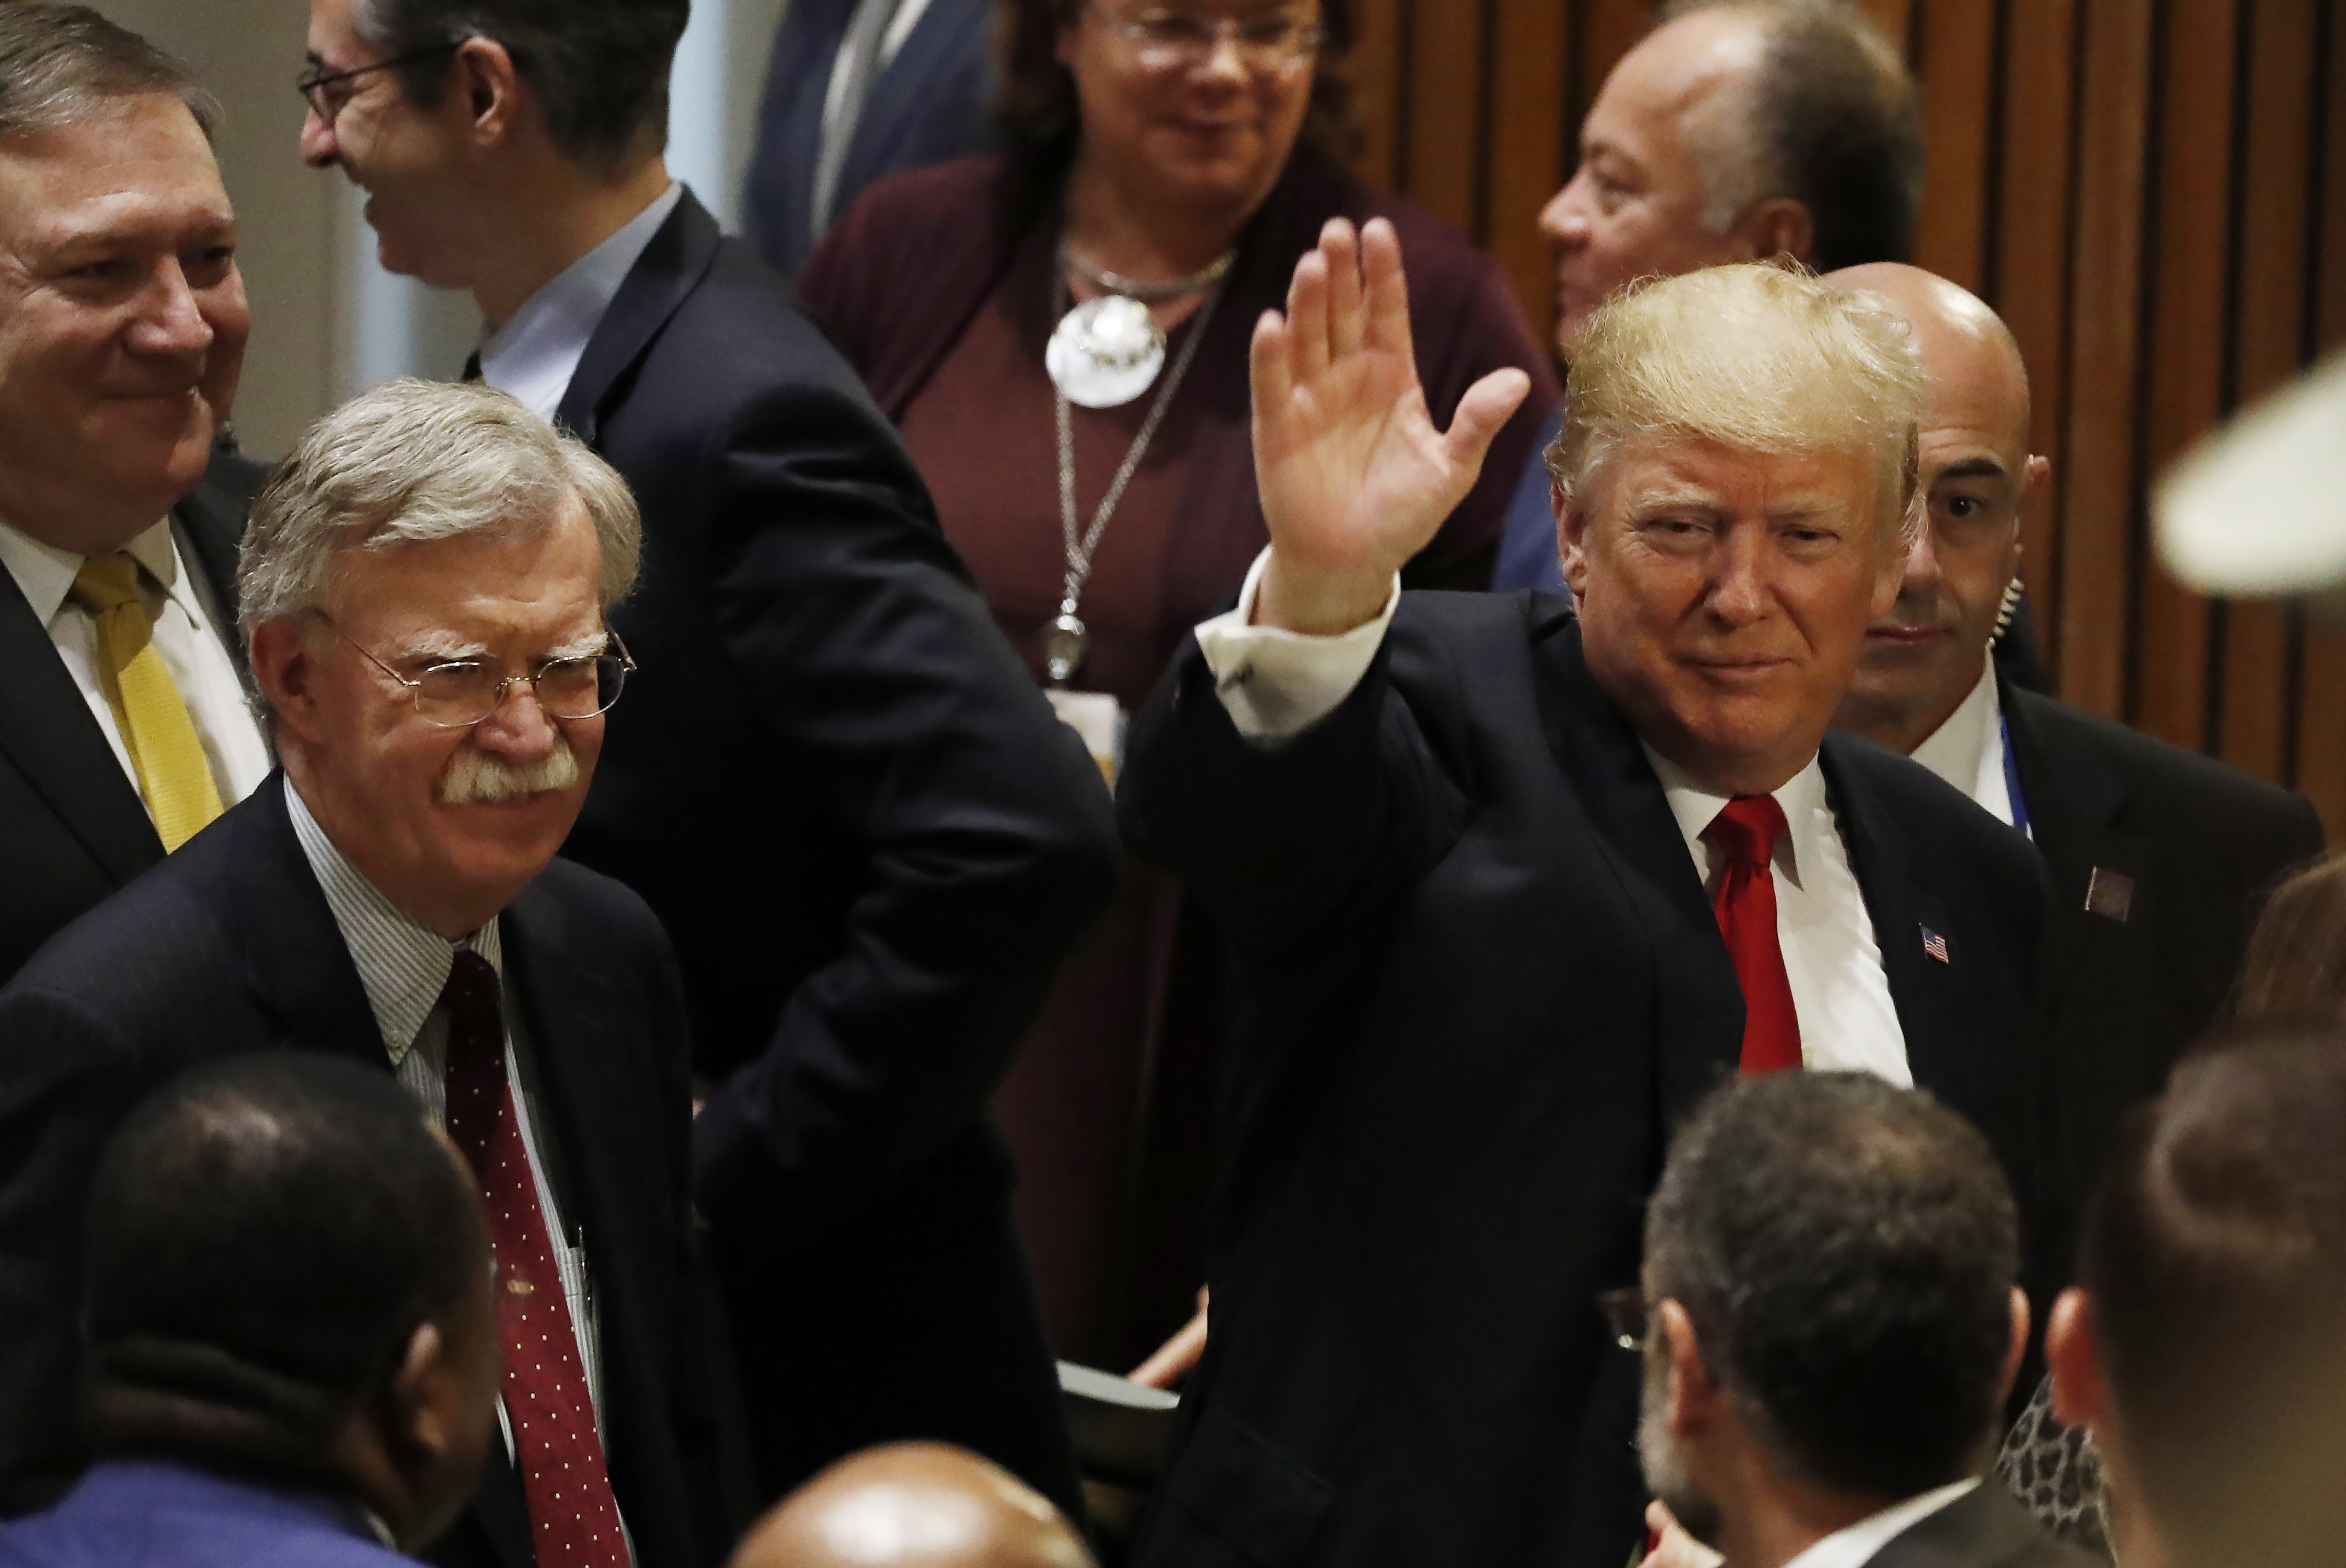 epa07832877 (FILE) - US President Donald Trump (R) waves as he departs with US National Security Advisor John Bolton (2L) and US Secretary of State Mike Pompeo (L) after speaking during a US-organized high-level event on Counter Narcotics in the 73rd session of the General Assembly of the United Nations at United Nations Headquarters in New York, New York, USA, 24 September 2018 (Reissued 10 September 2019). Trump tweeted on 10 September 2019 that he asked his national security advisor John Bolton to resign and that he will name a new advisor on the following week.  EPA/JASON SZENES *** Local Caption *** 54649382